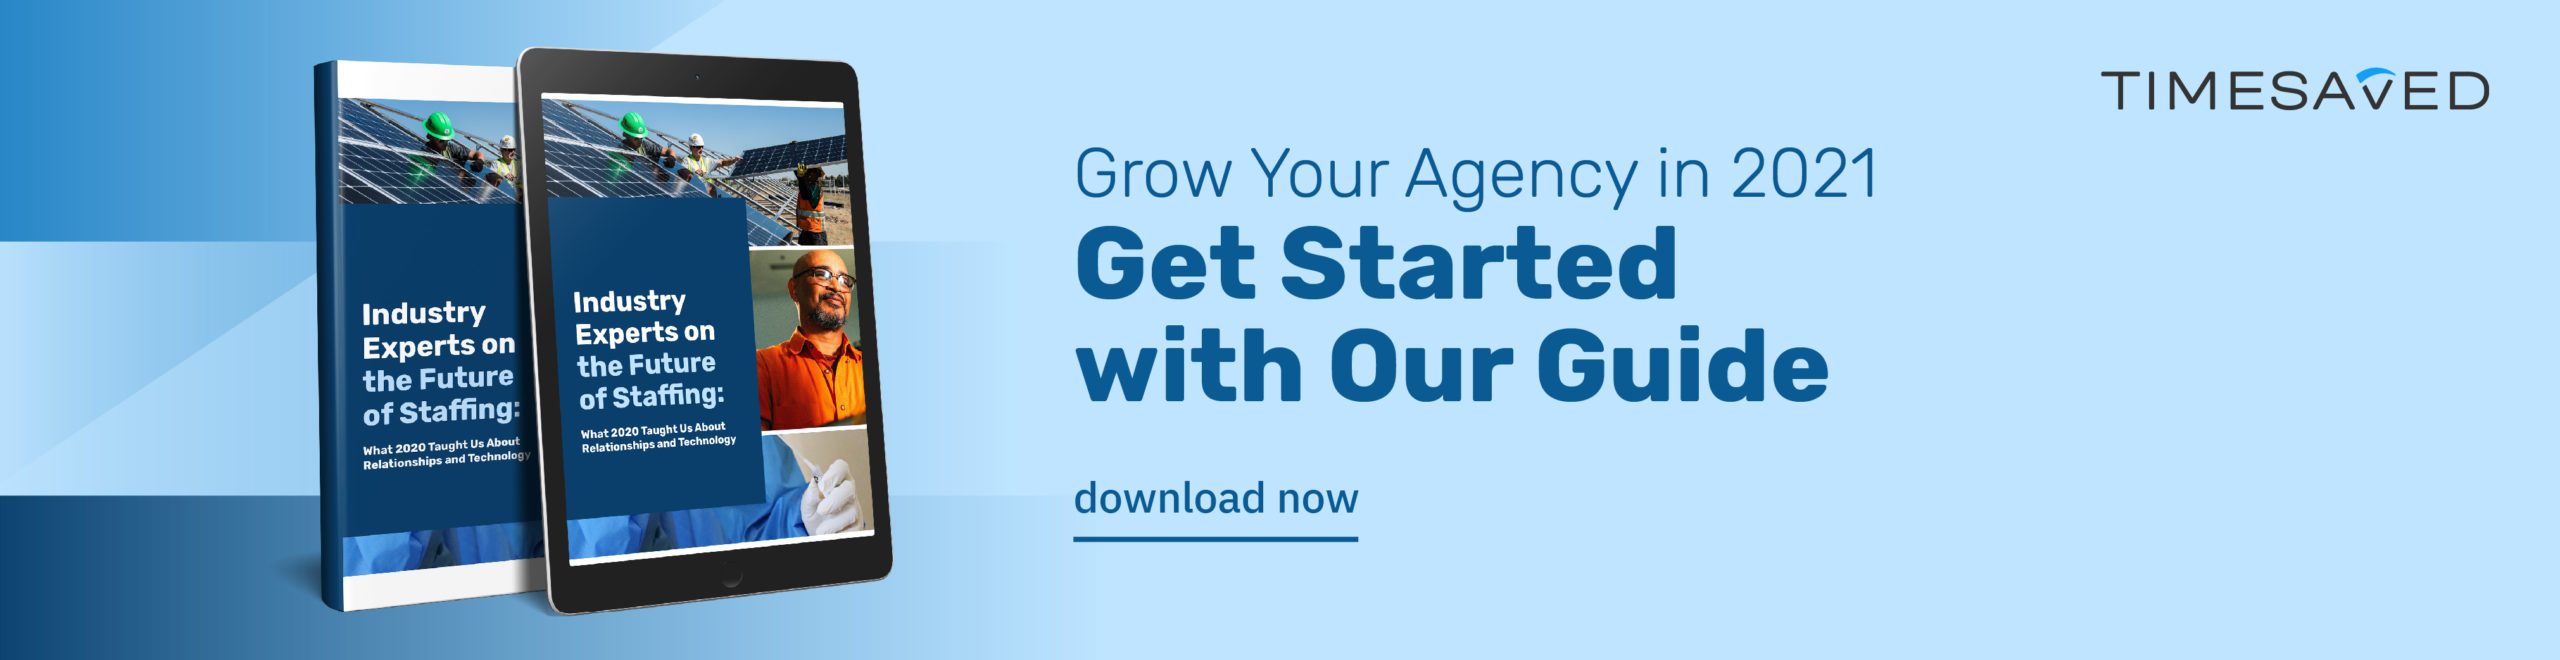 grow your agency in 2021